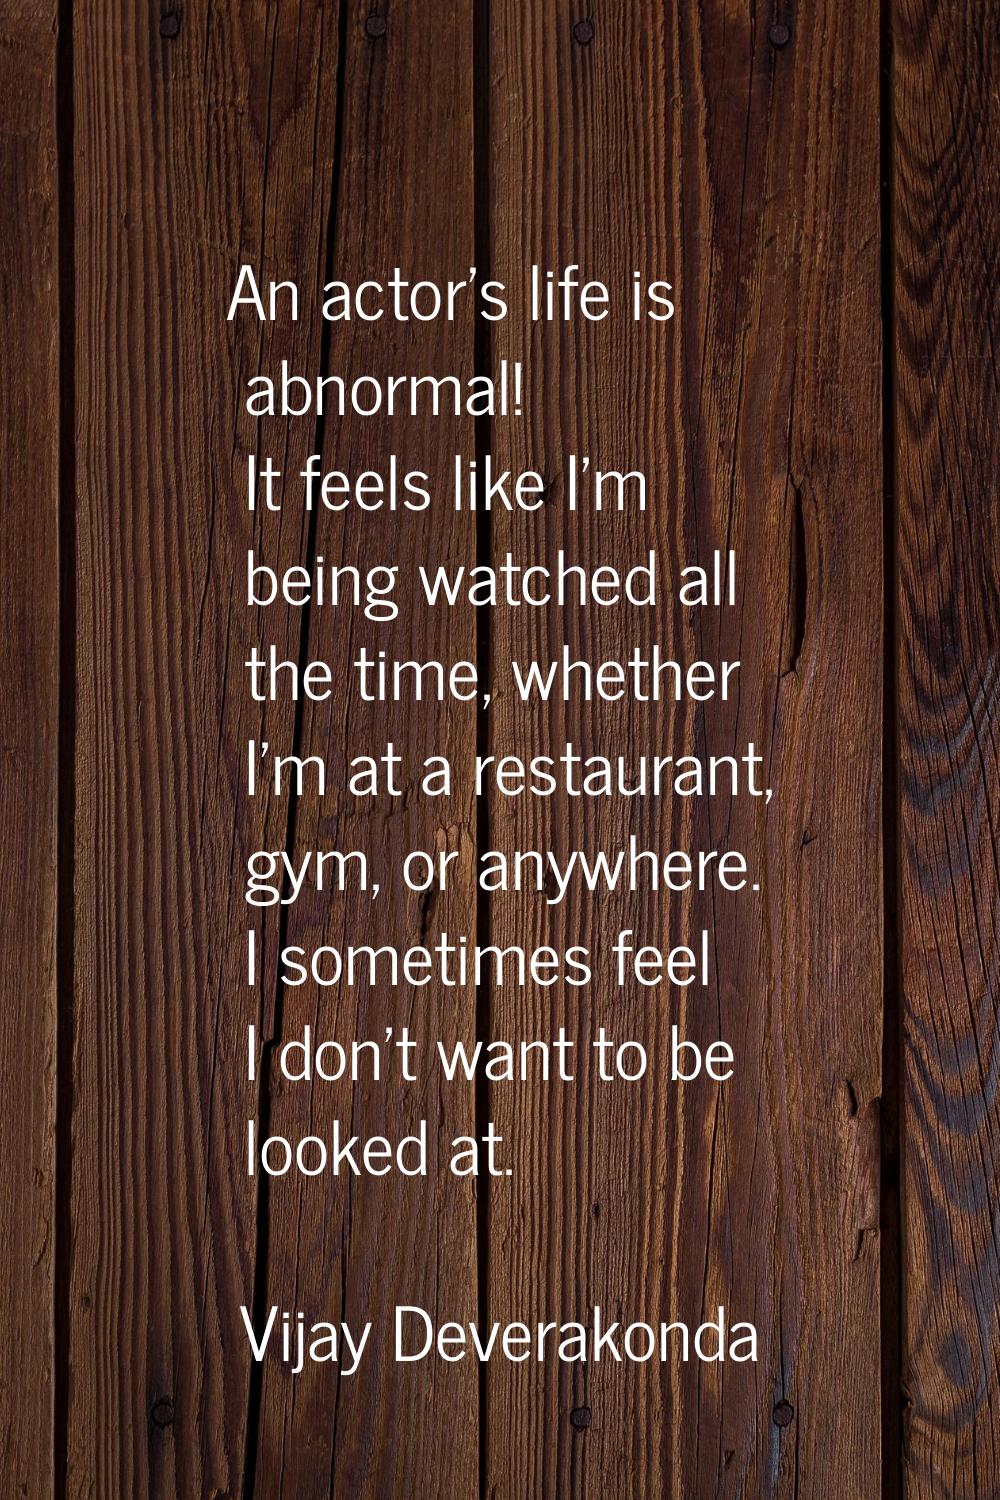 An actor's life is abnormal! It feels like I'm being watched all the time, whether I'm at a restaur